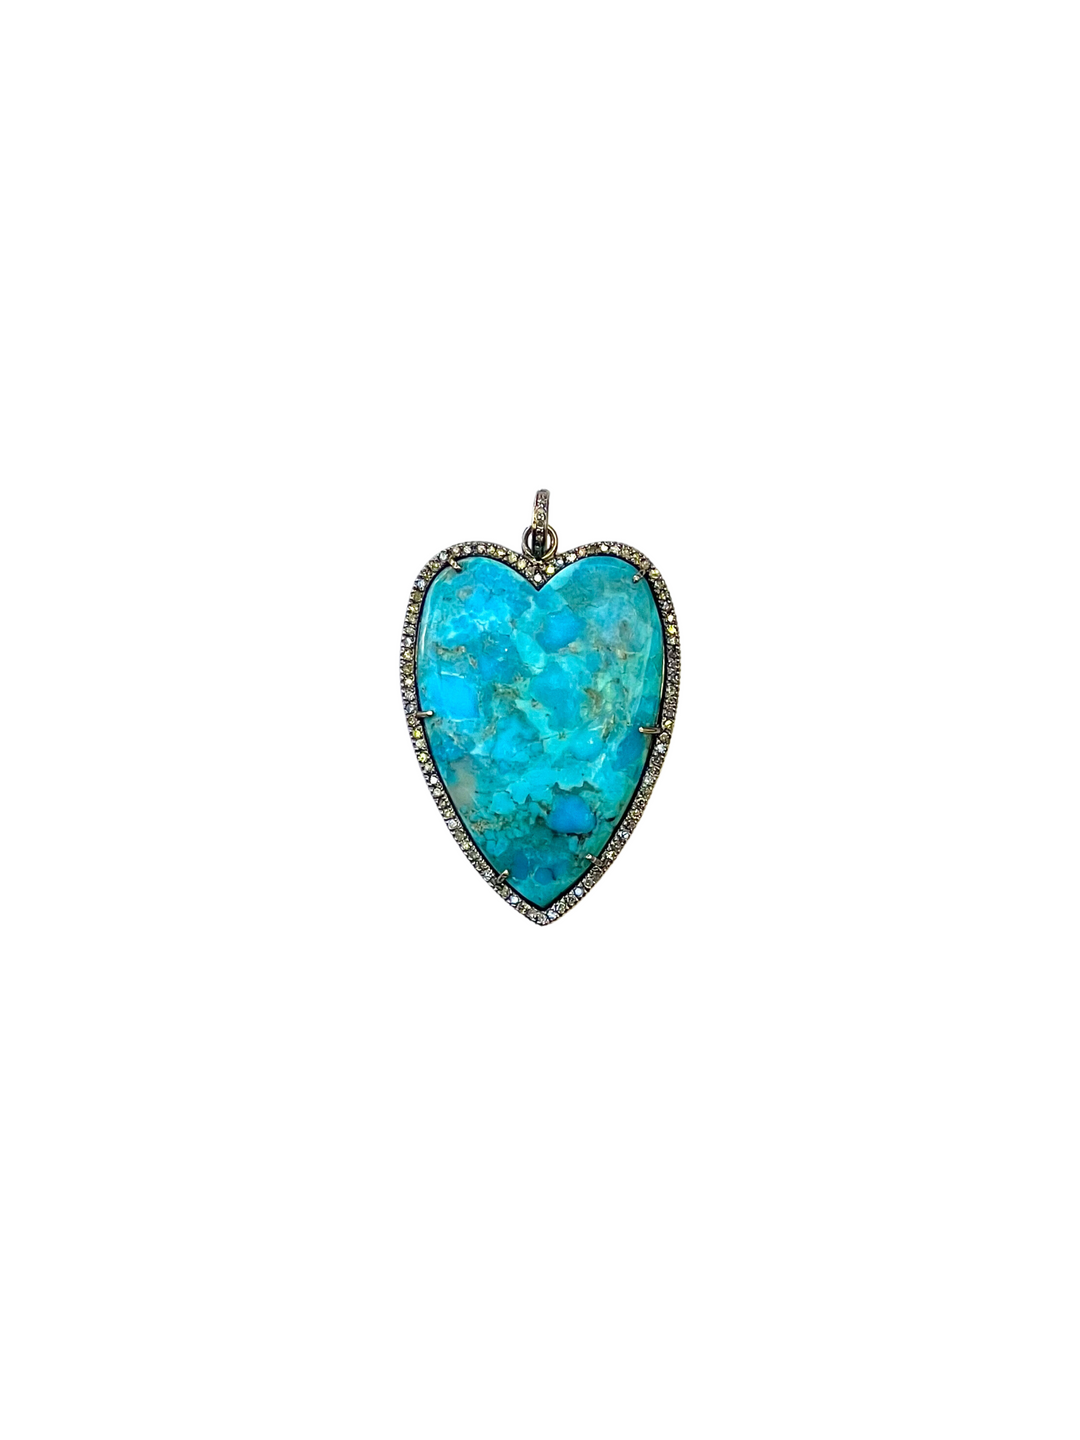 The Woods Fine Jewelry Turquoise Heart Pendant